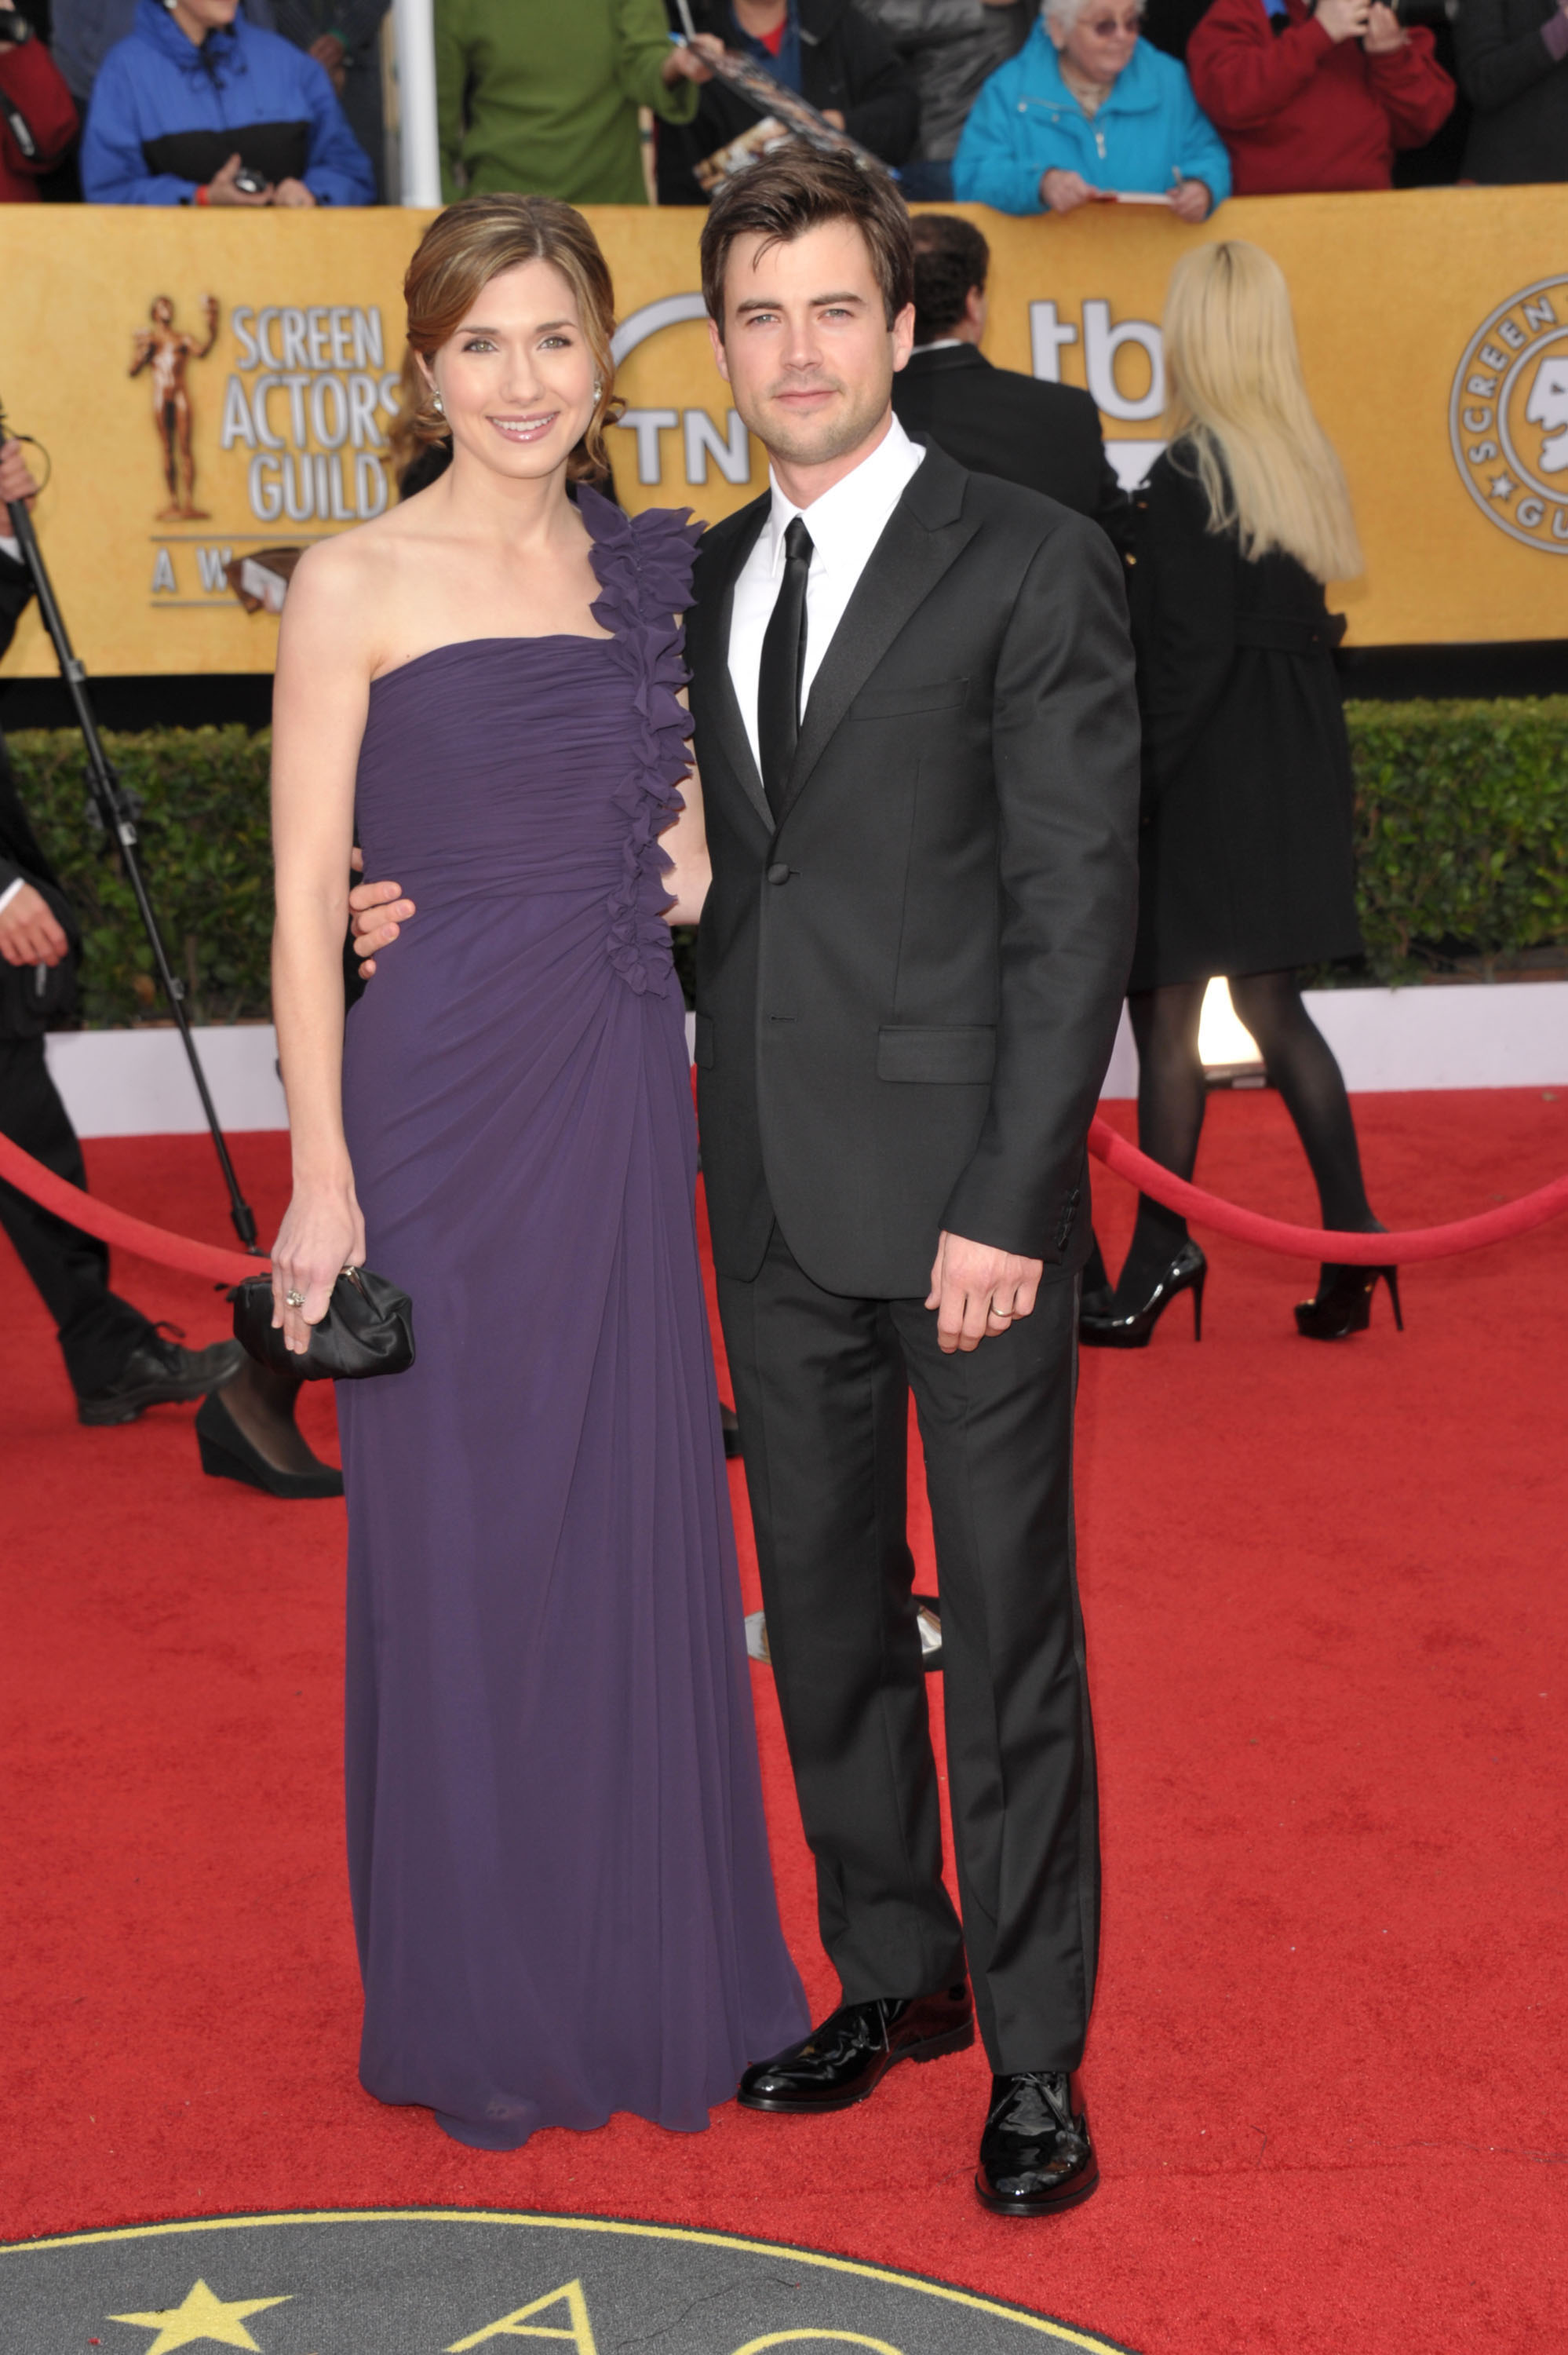 Matt Long and Lora Chaffins at the 17th Annual Screen Actors Guild Awards on January 30, 2011, in Los Angeles, California. | Source: Getty Images